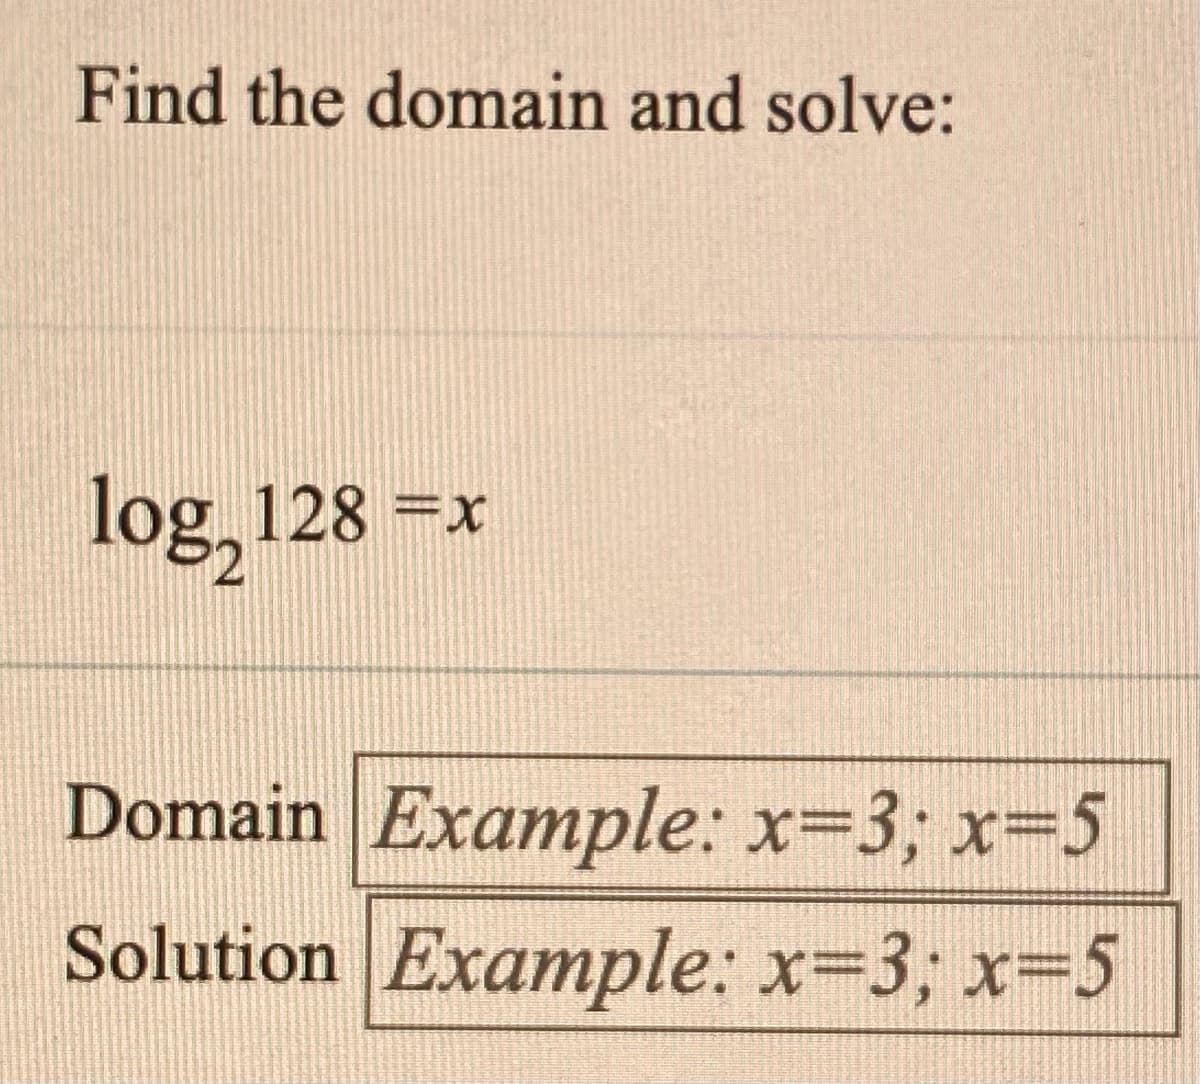 Find the domain and solve:
log, 128 =x
Domain Example: x=3; x-5
Solution Example: x-3; x35
